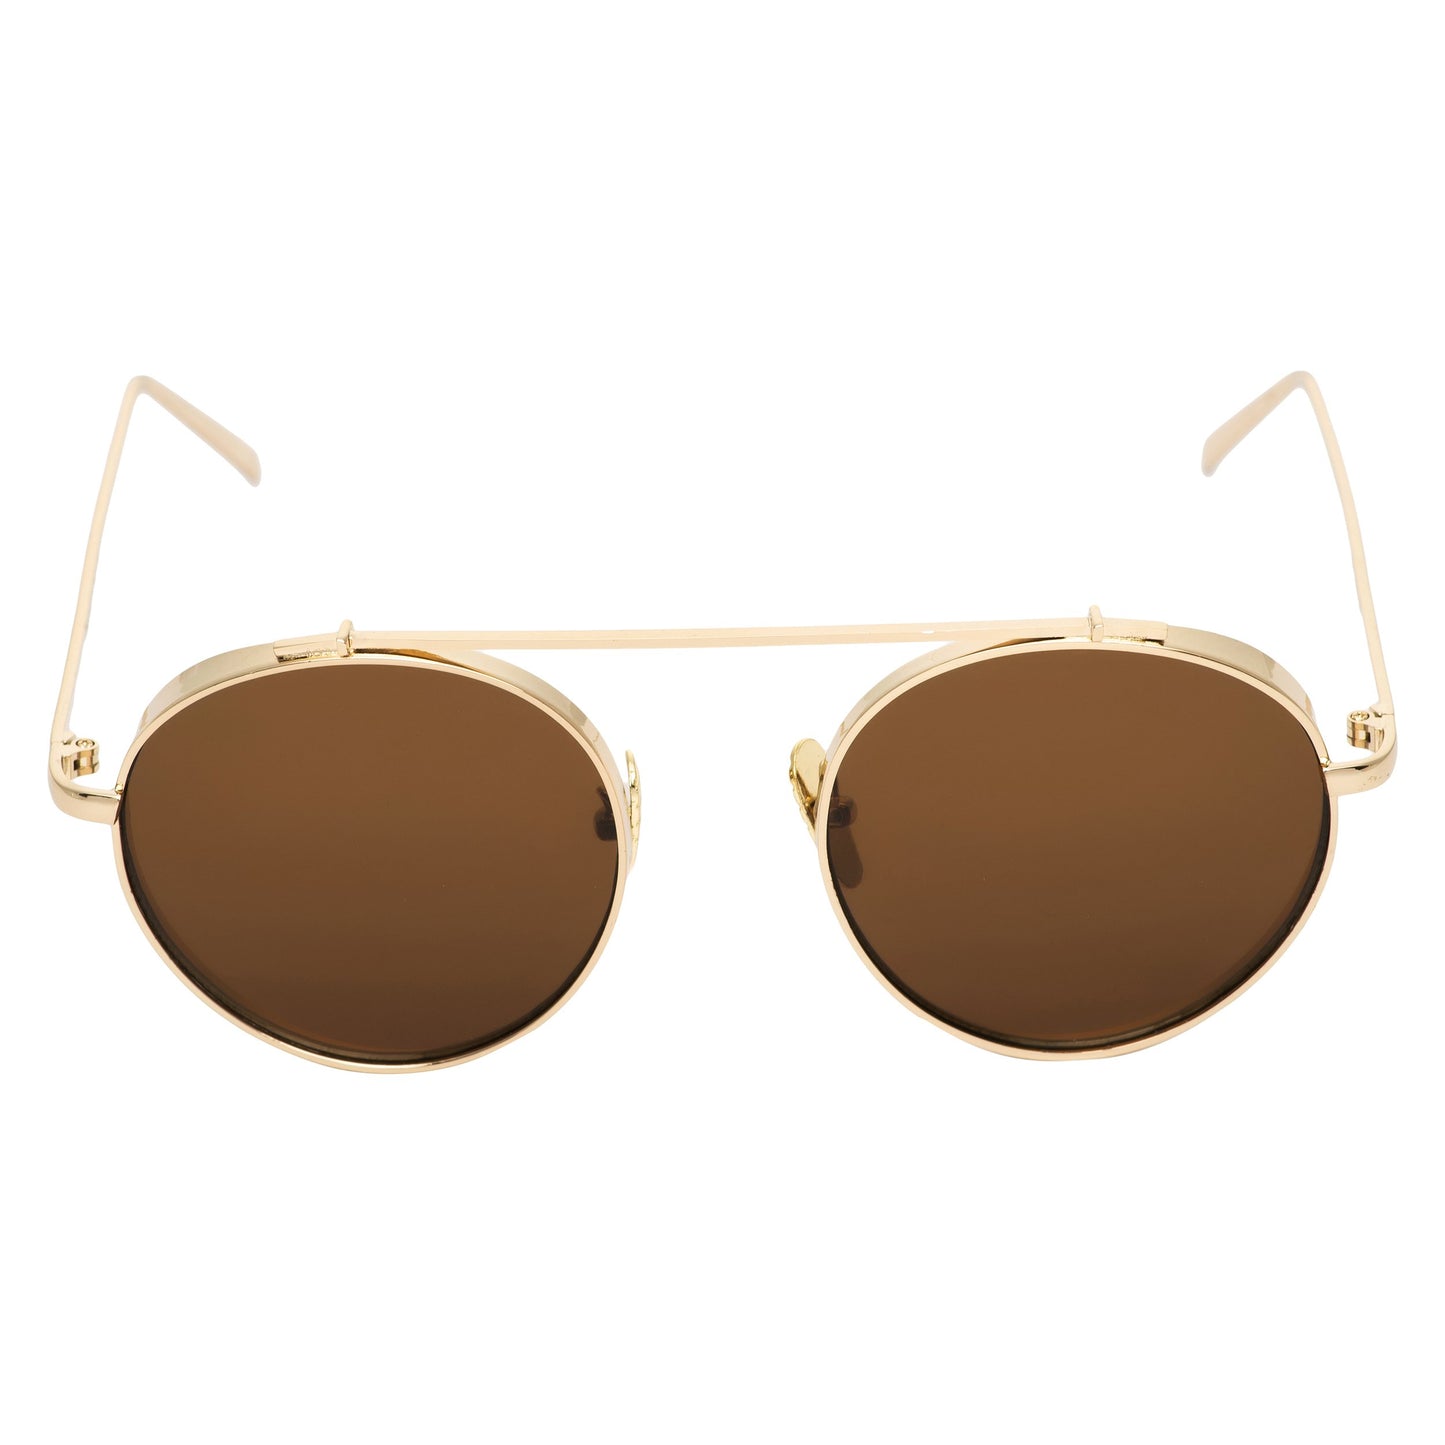 Classy Round Brown And Gold Sunglasses